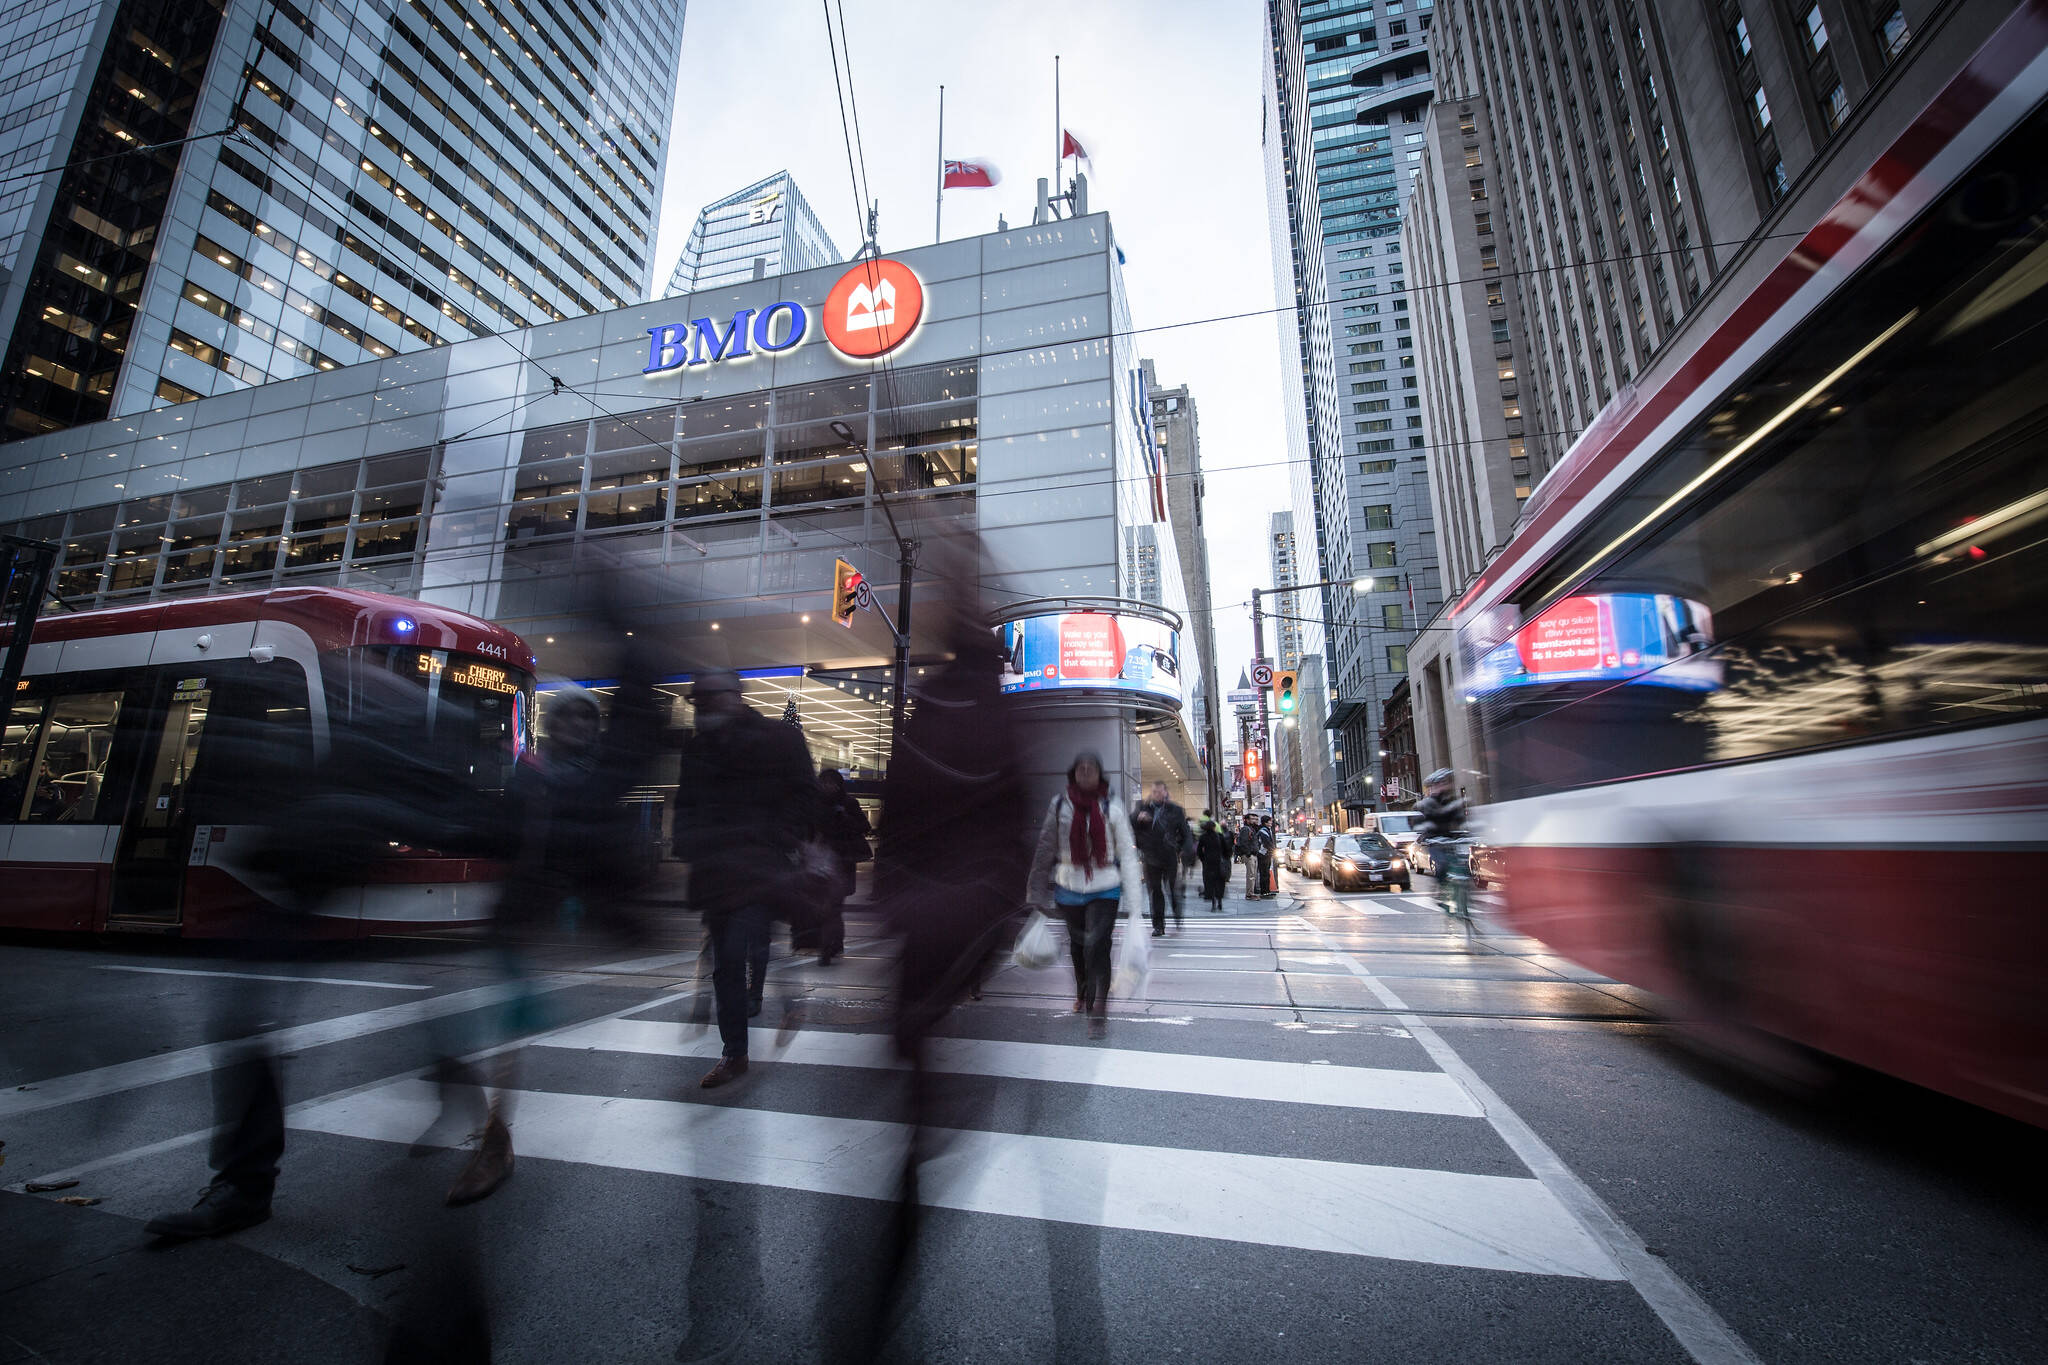 Toronto is now one of the most economically influential cities on earth